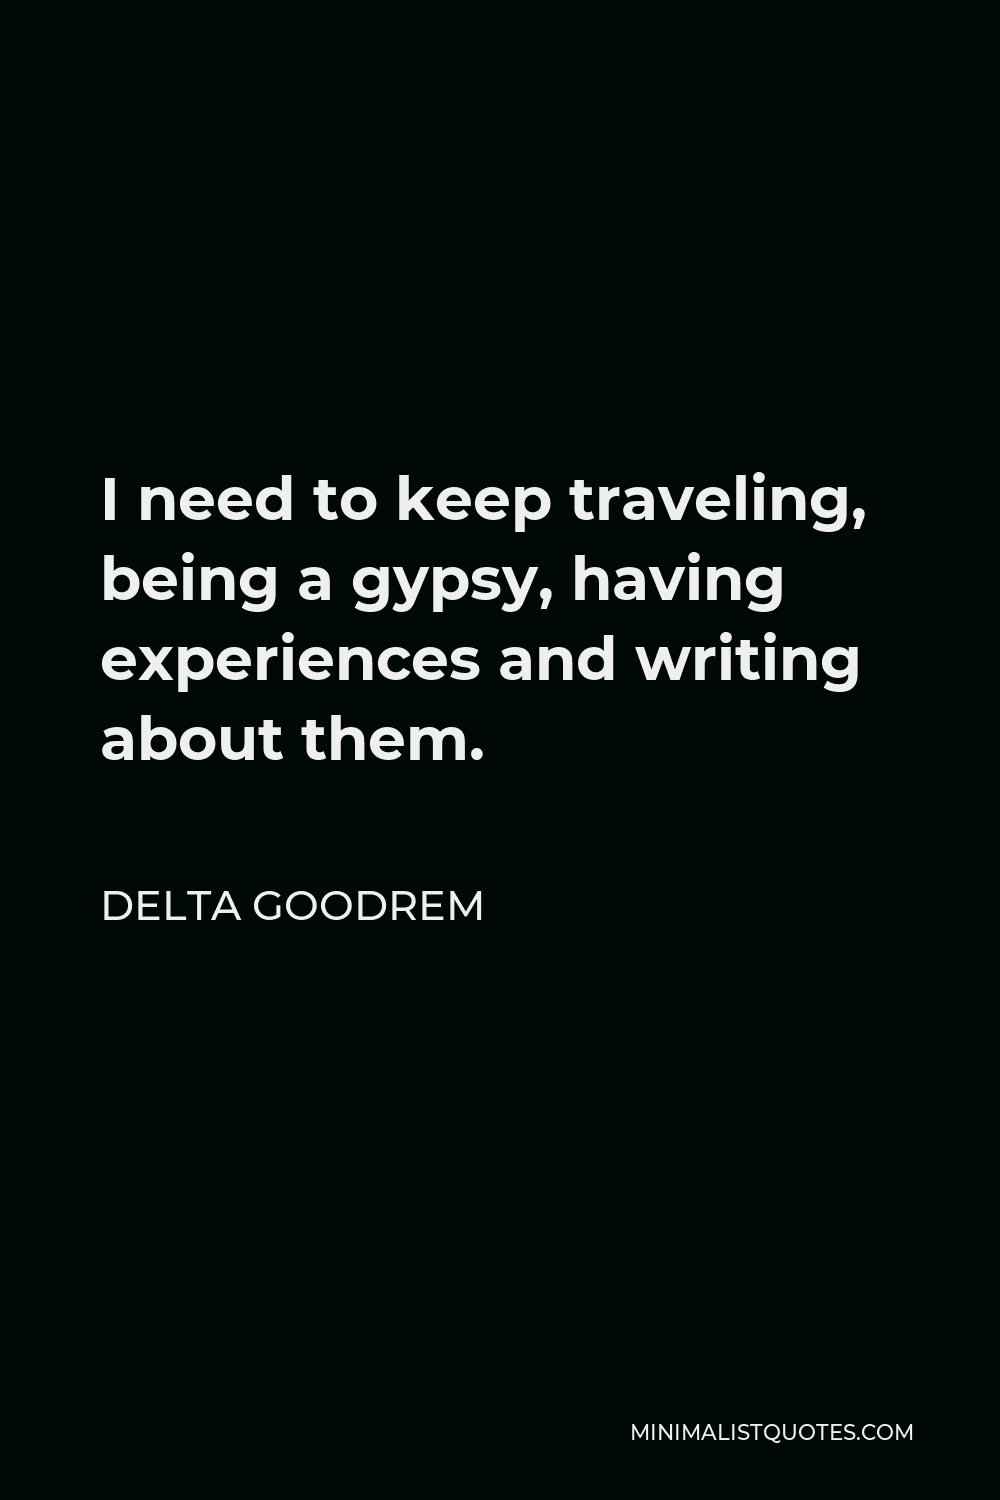 Delta Goodrem Quote - I need to keep traveling, being a gypsy, having experiences and writing about them.